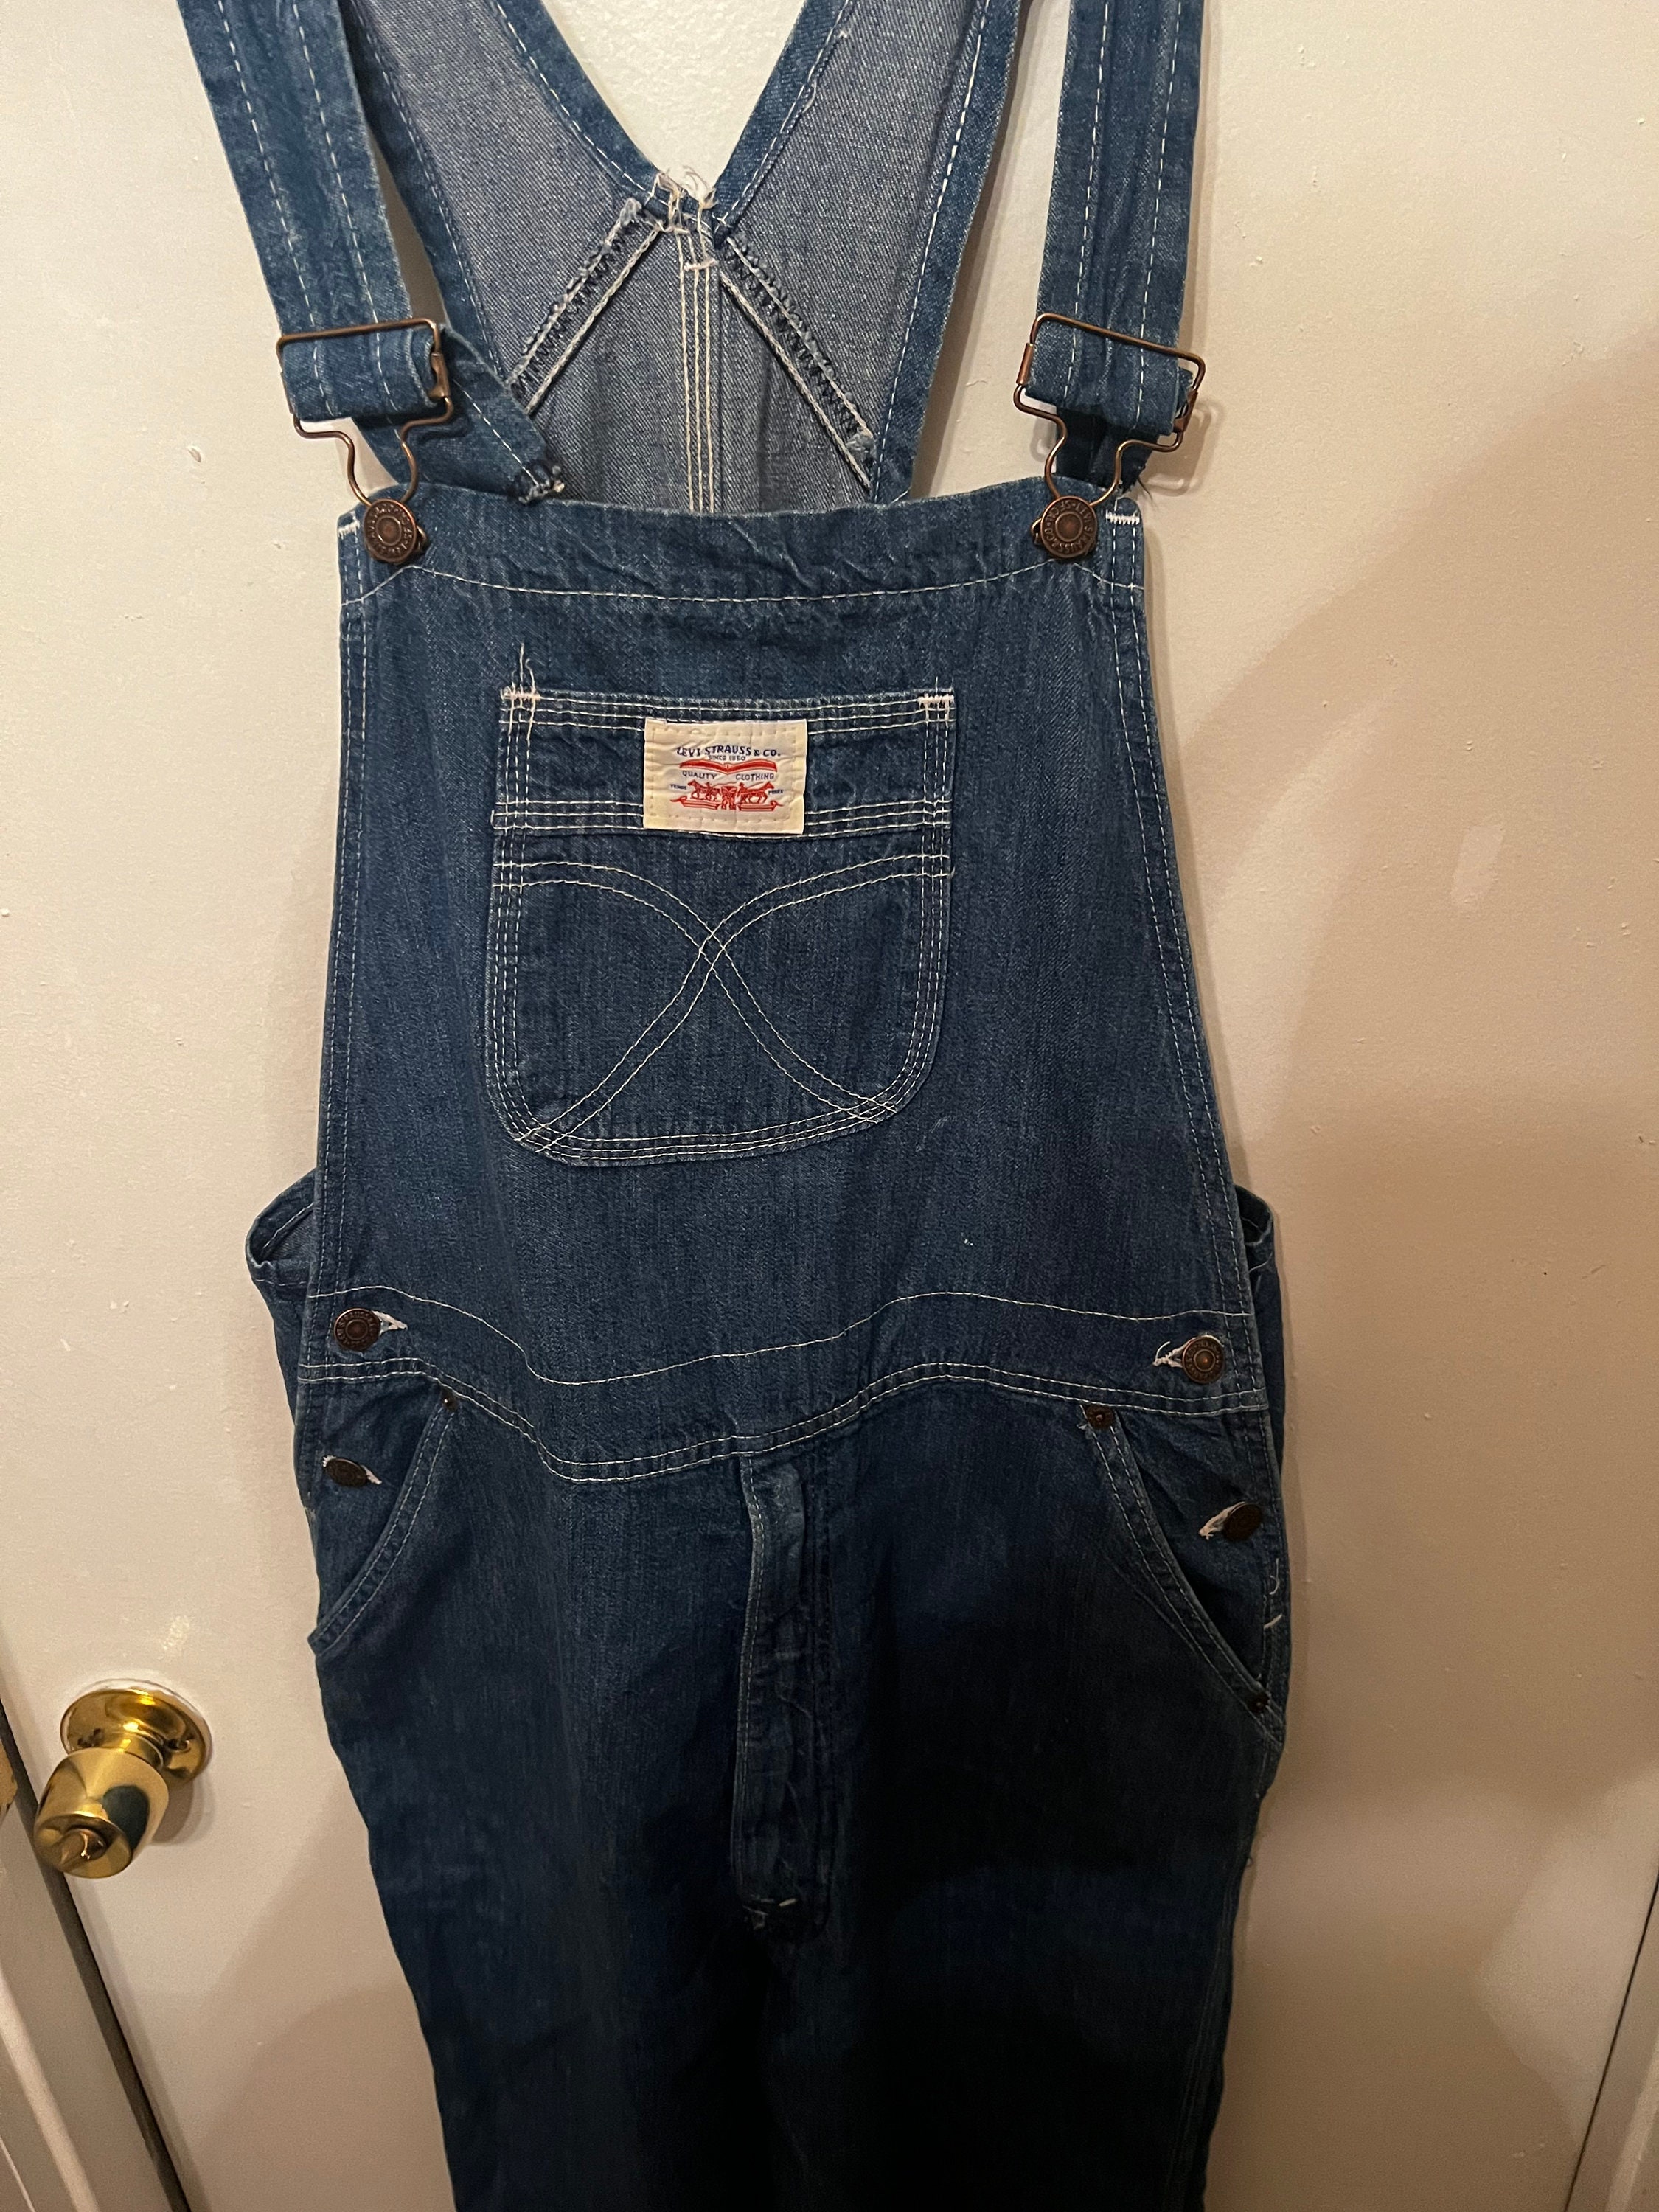 Vintage Levis Strauss & Co Overalls - Etsy